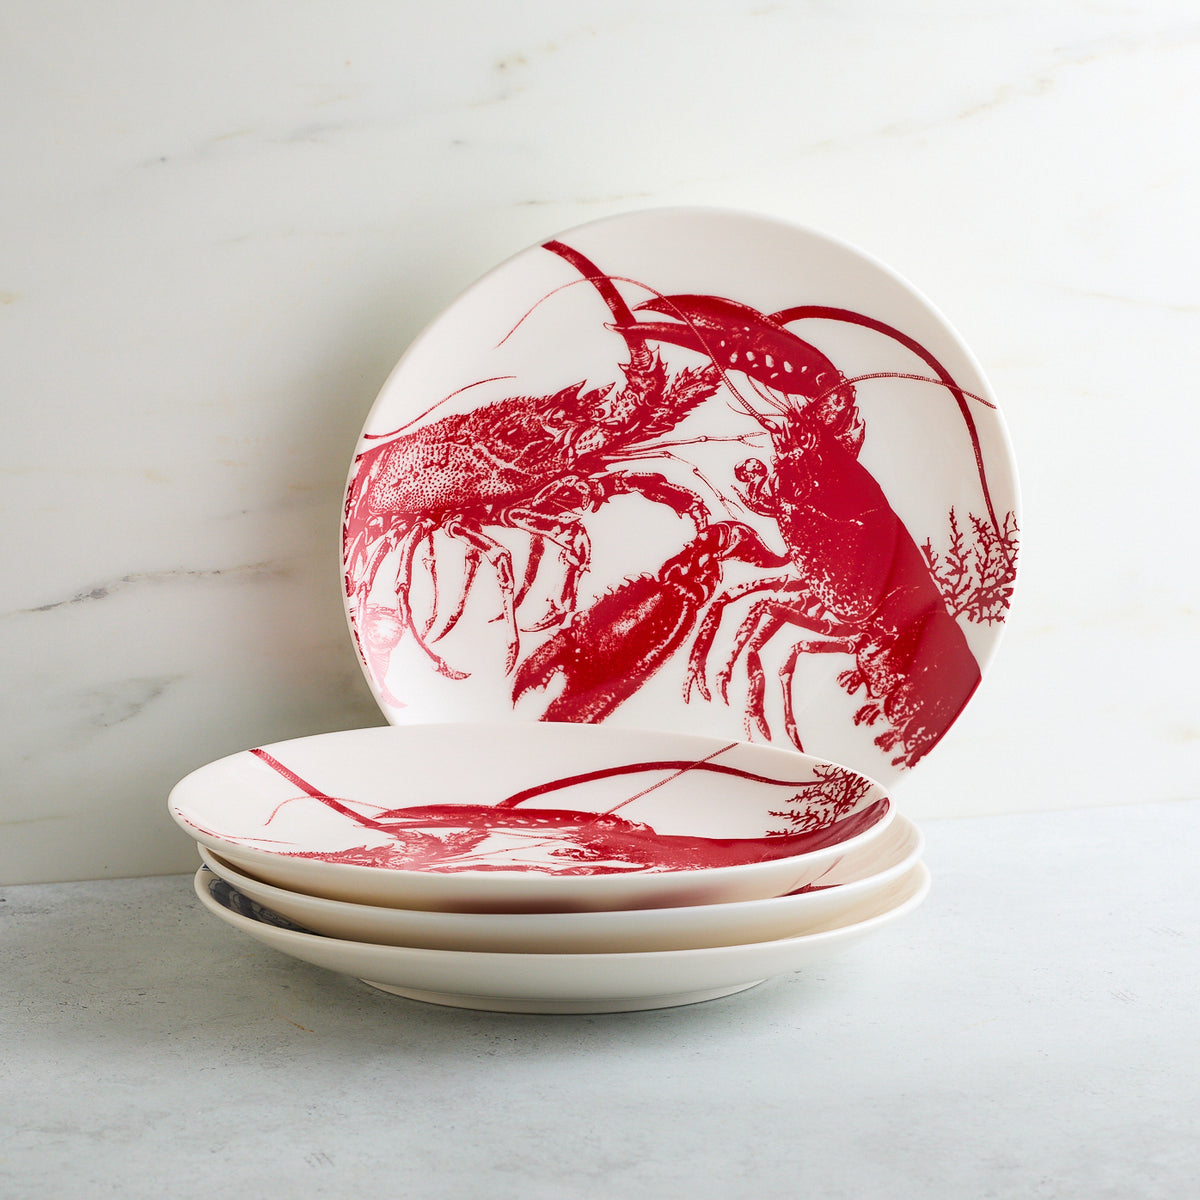 A stack of round white ceramic plates with red lobster illustrations, placed on a light-colored surface against a white marble background, perfectly matches the charming July Fourth Bundle by Caskata hanging nearby.